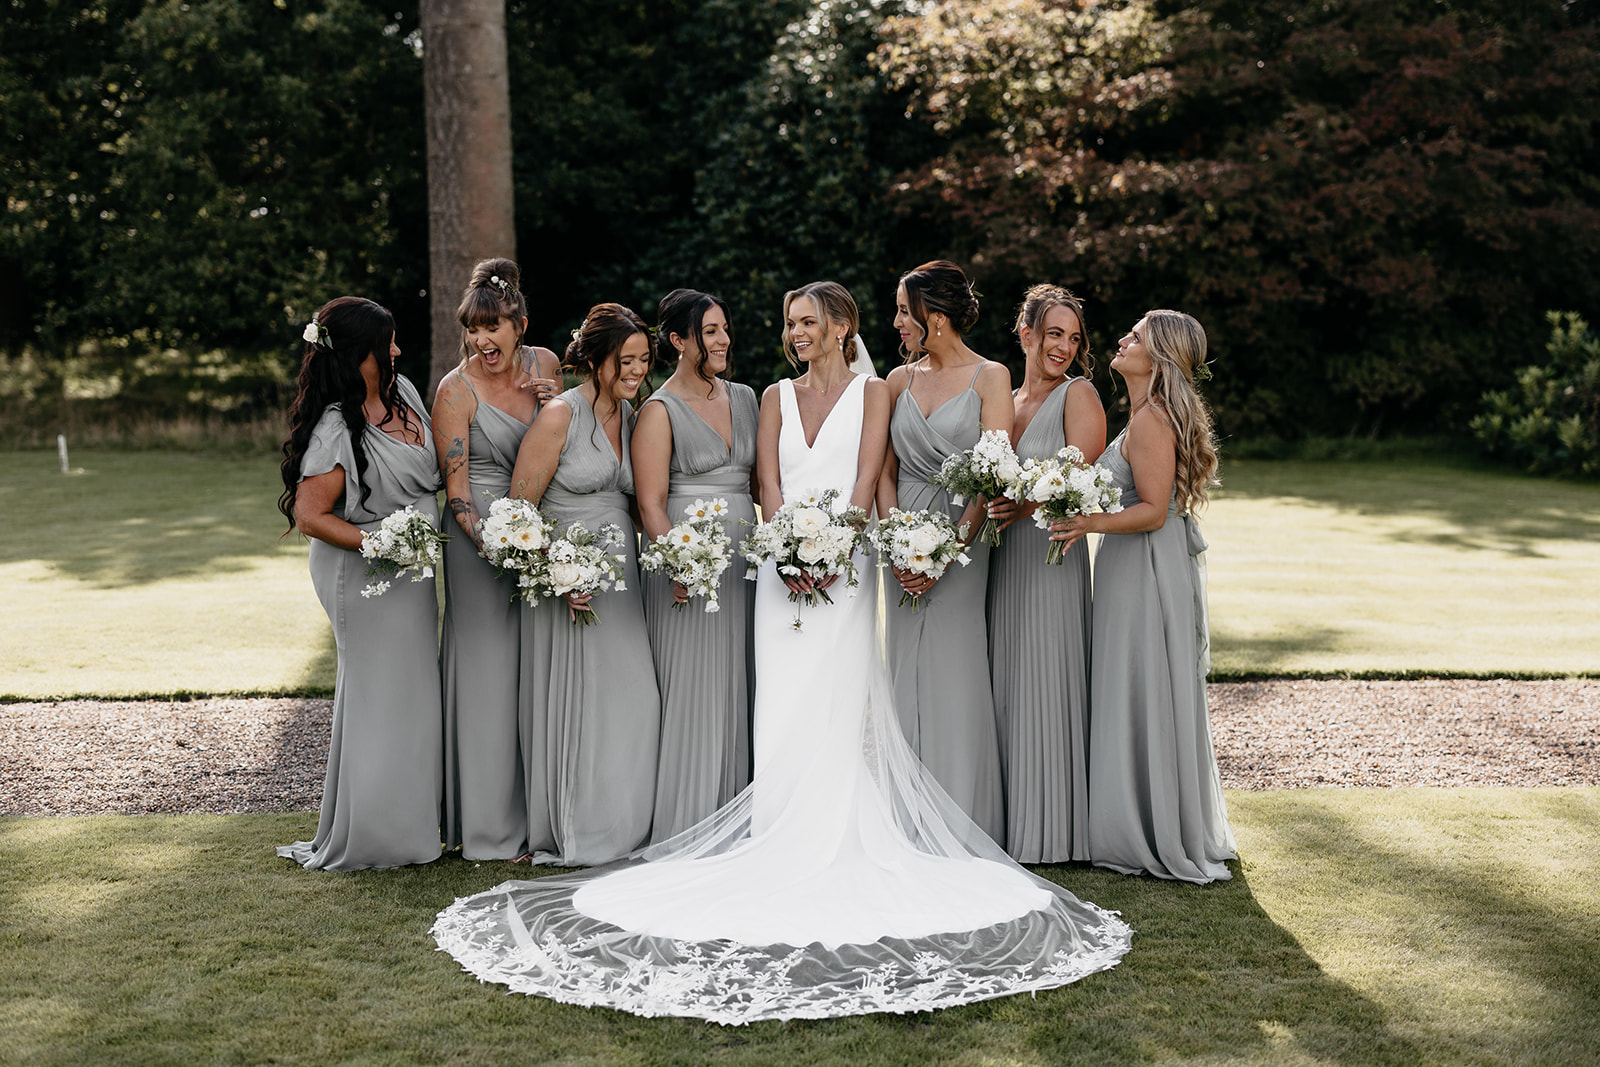 A bride stands in the middle of her bridesmaids wearing sage green dresses and holding white floral bouquets